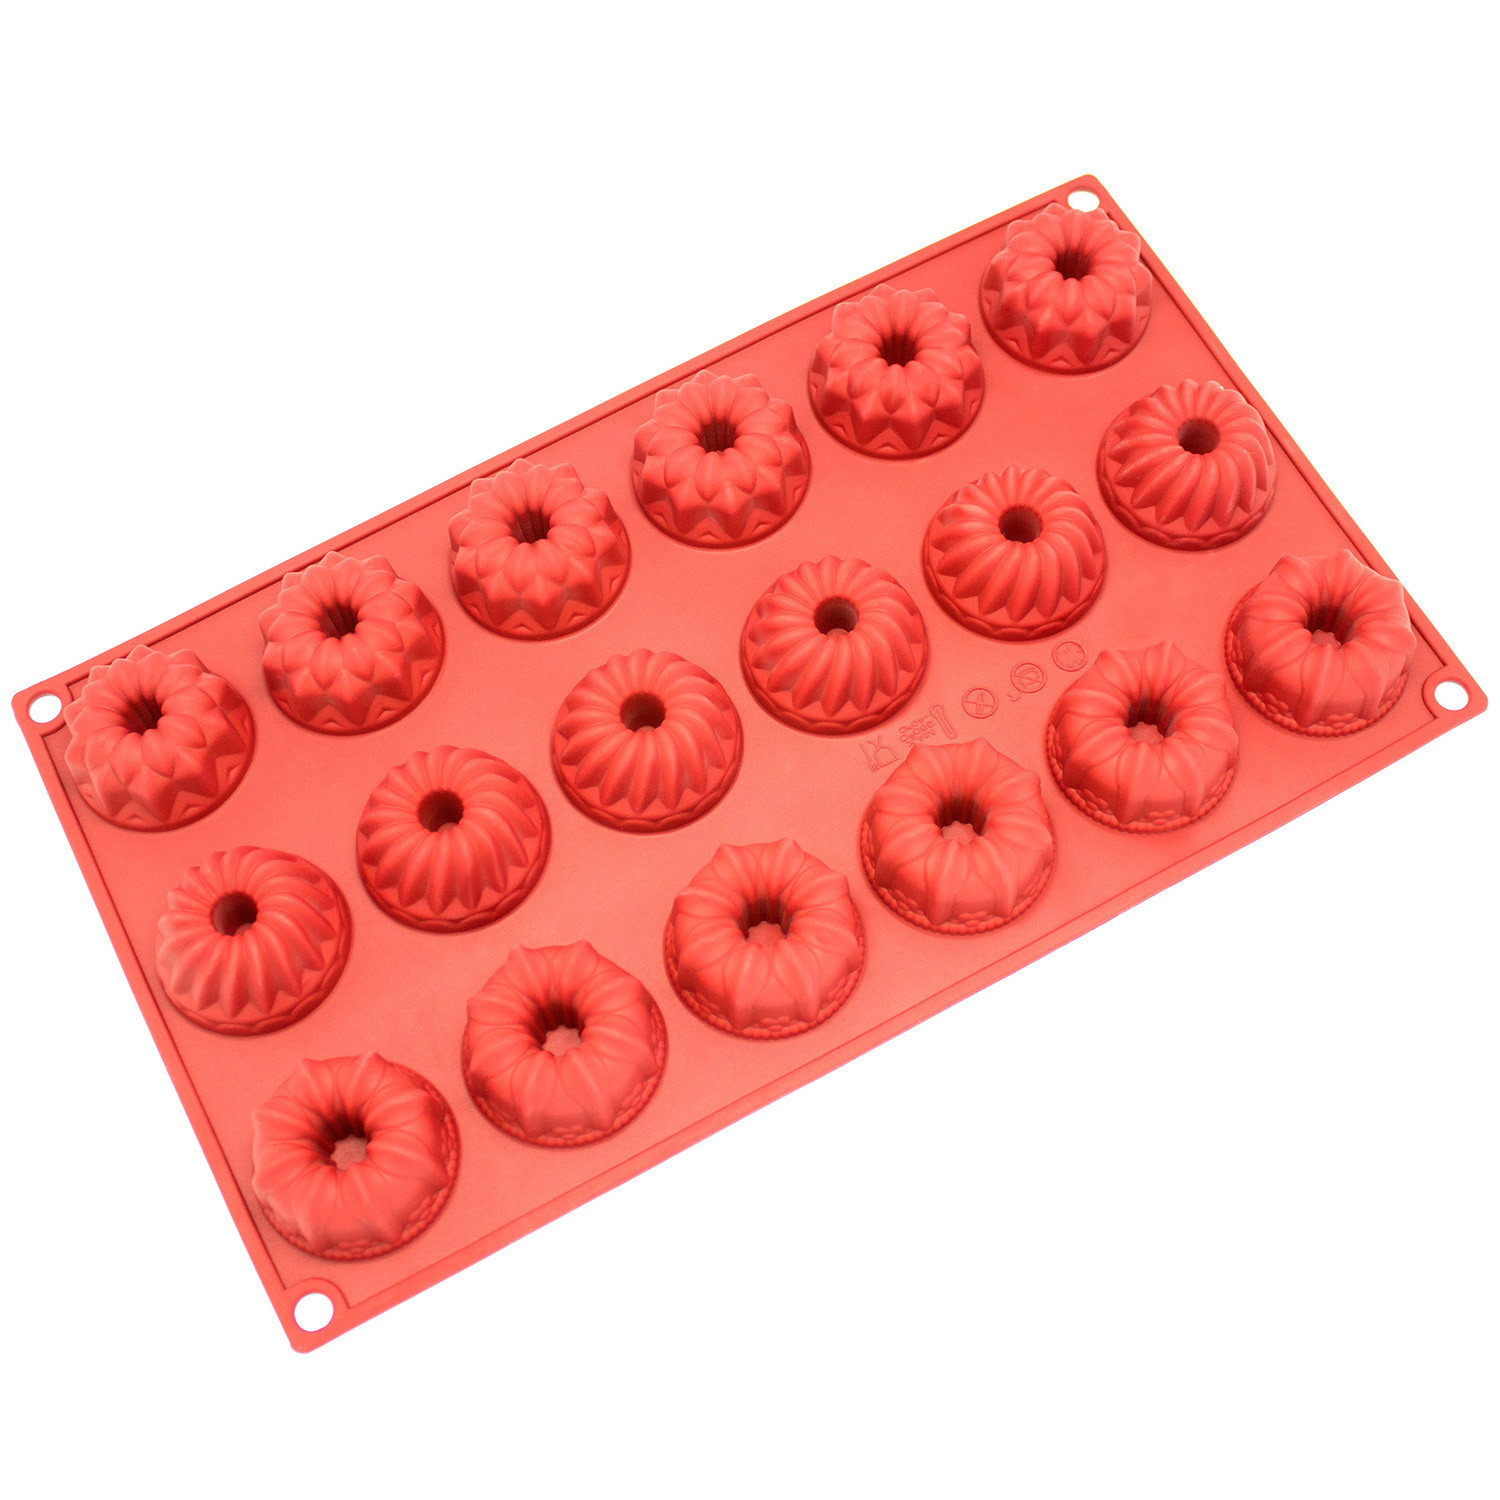 Freshware Silicone Mold, Soap Mold for Bundt Cake, Cupcake, Muffin, Coffe Cake, Pudding and Soap, Mini Fancy, 18-Cavity